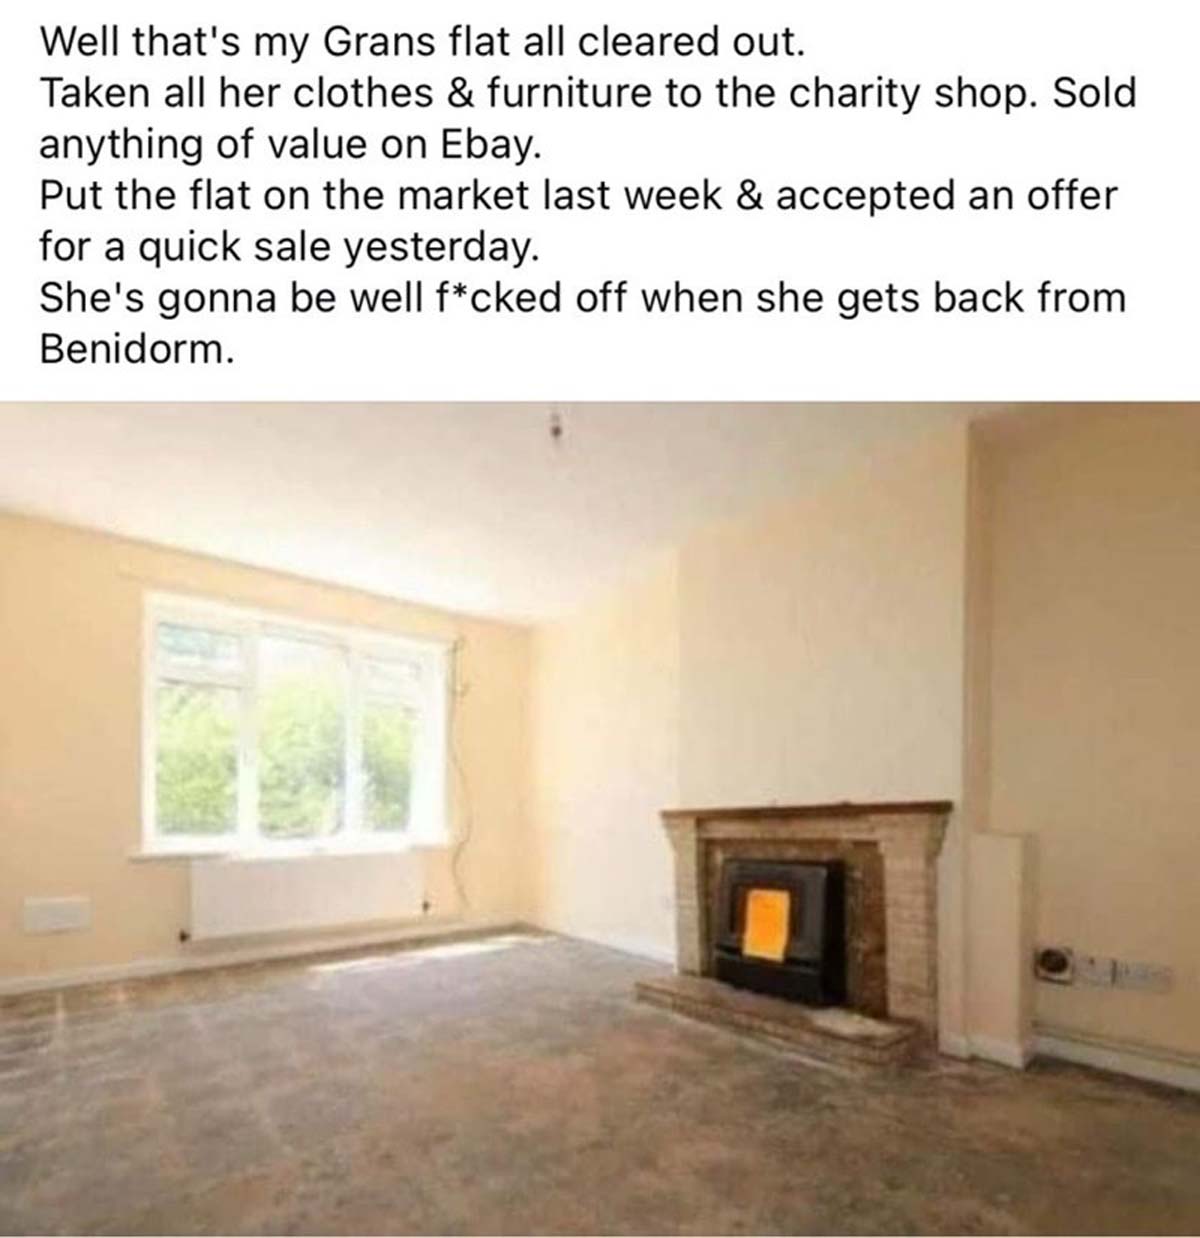 hearth - Well that's my Grans flat all cleared out. Taken all her clothes & furniture to the charity shop. Sold anything of value on Ebay. Put the flat on the market last week & accepted an offer for a quick sale yesterday. She's gonna be well fcked off w